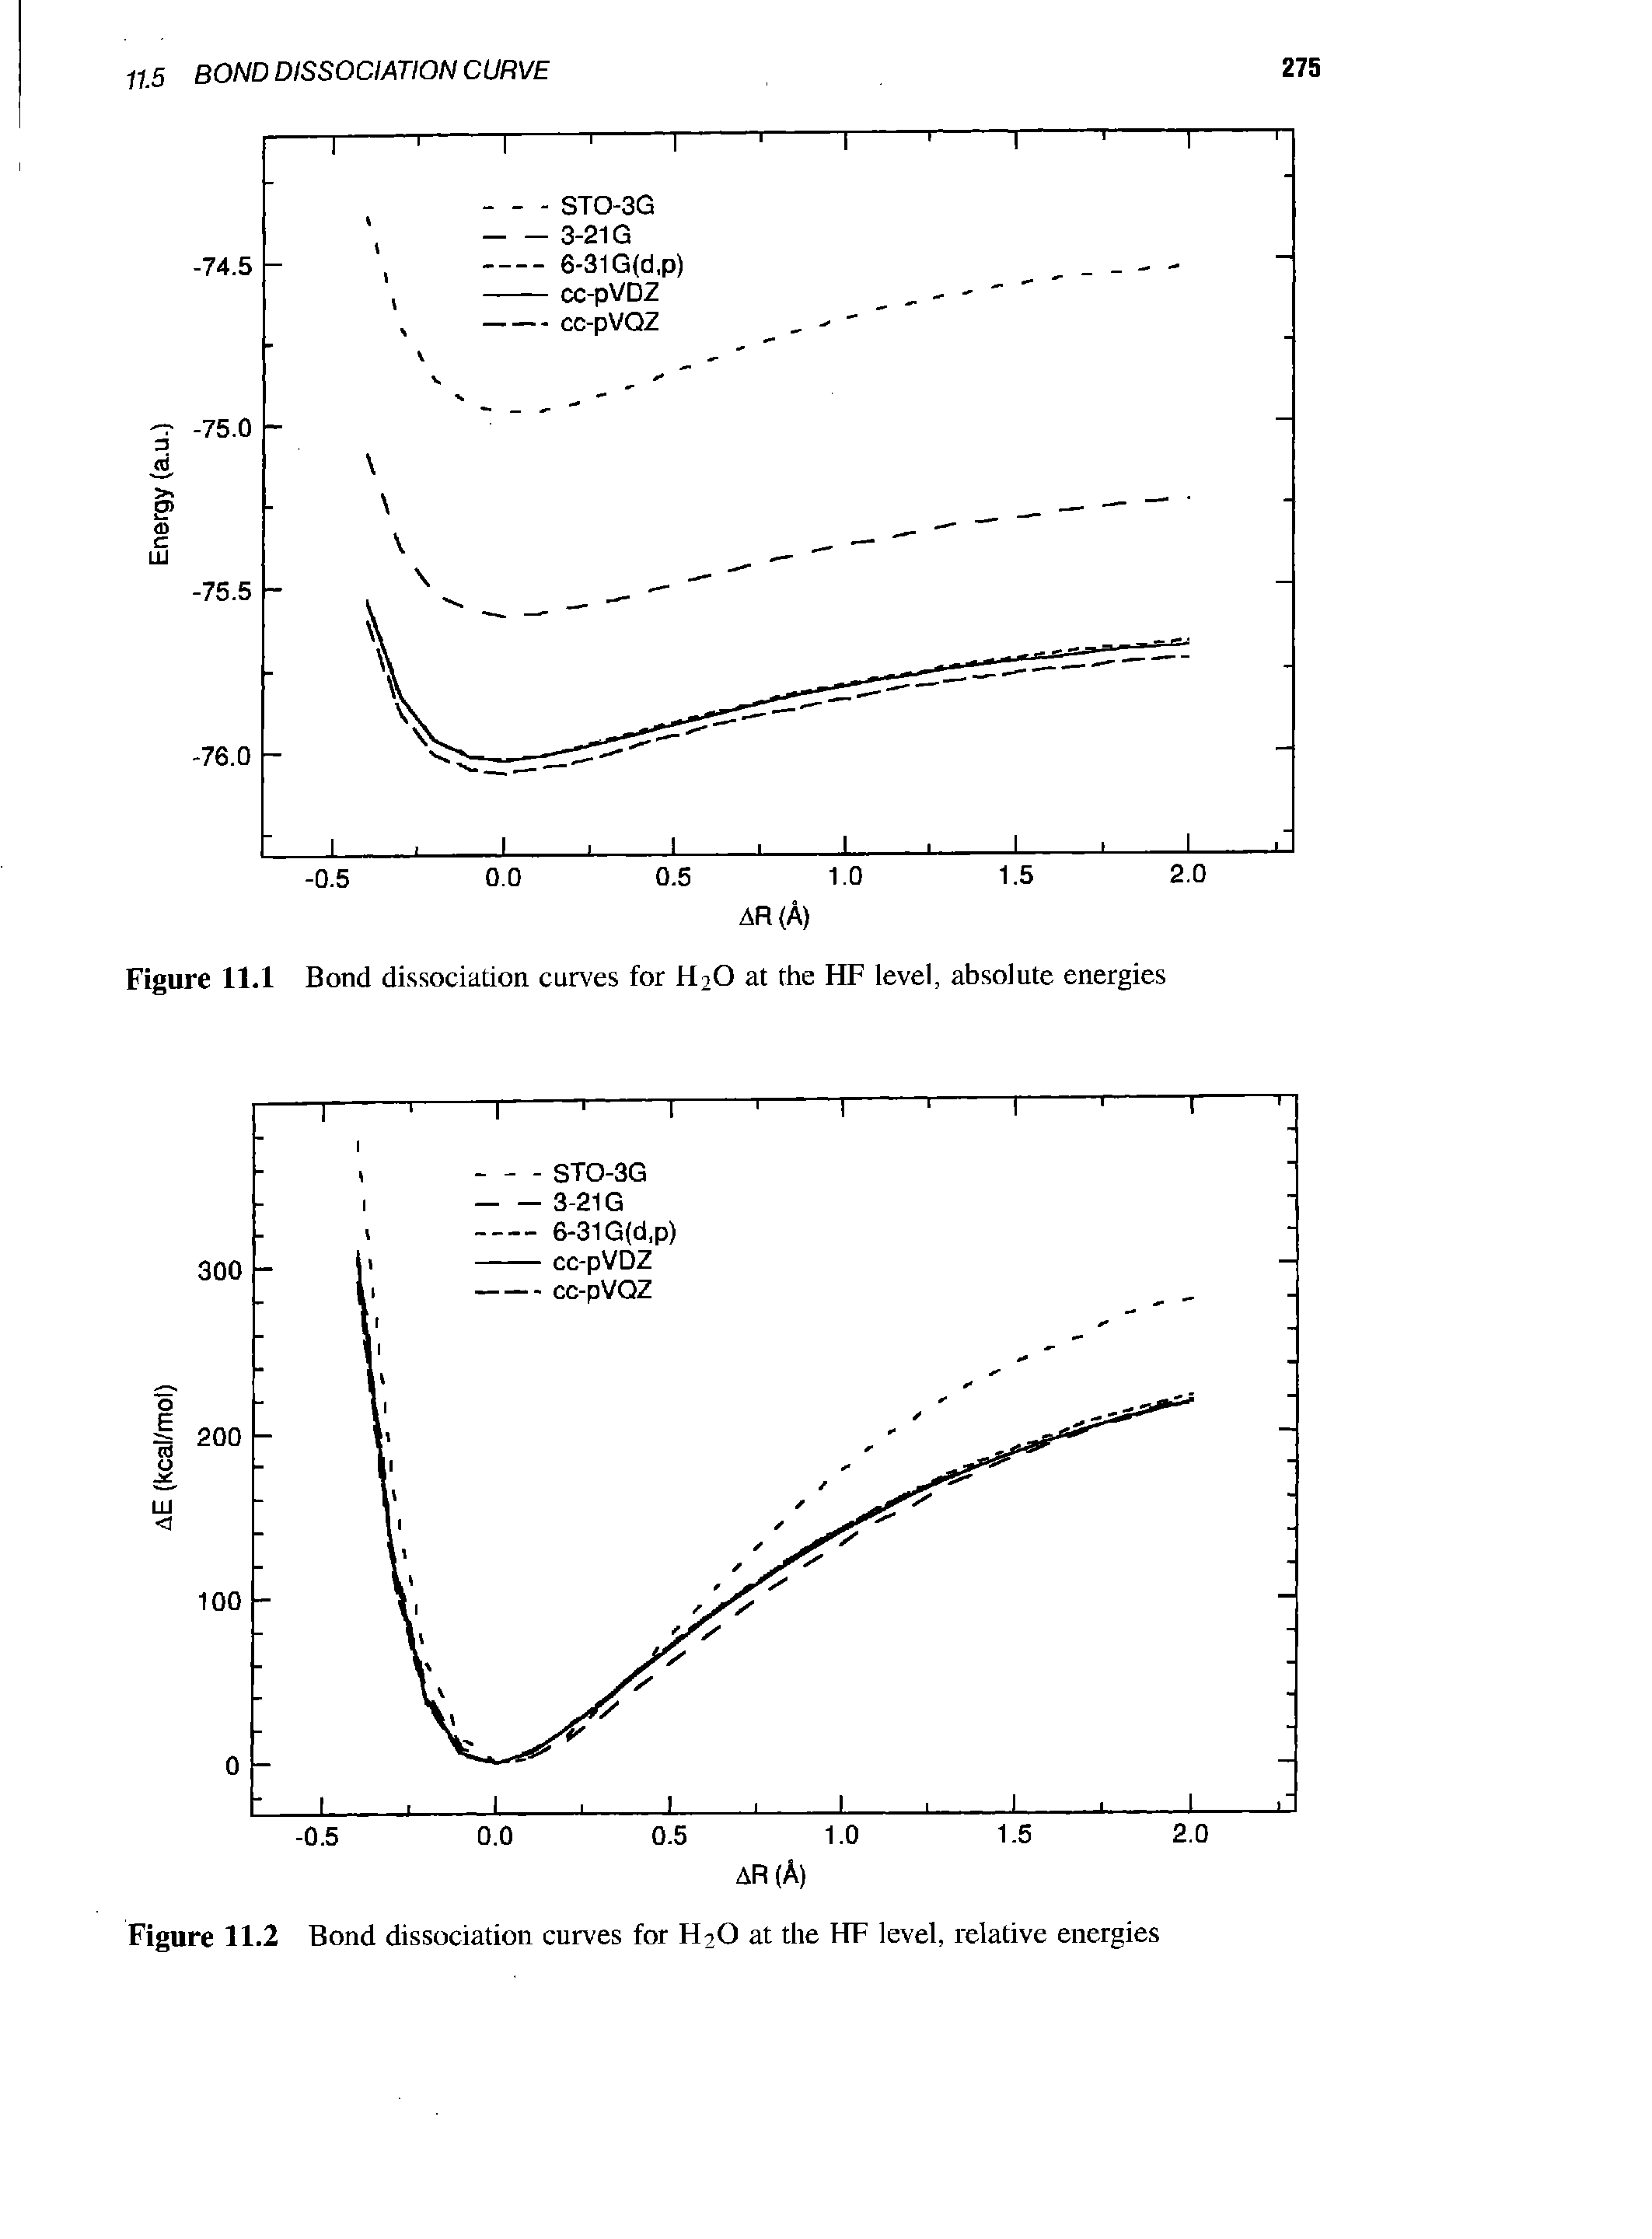 Figure 11.1 Bond dissociation curves for H2O at the HF level, absolute energies...